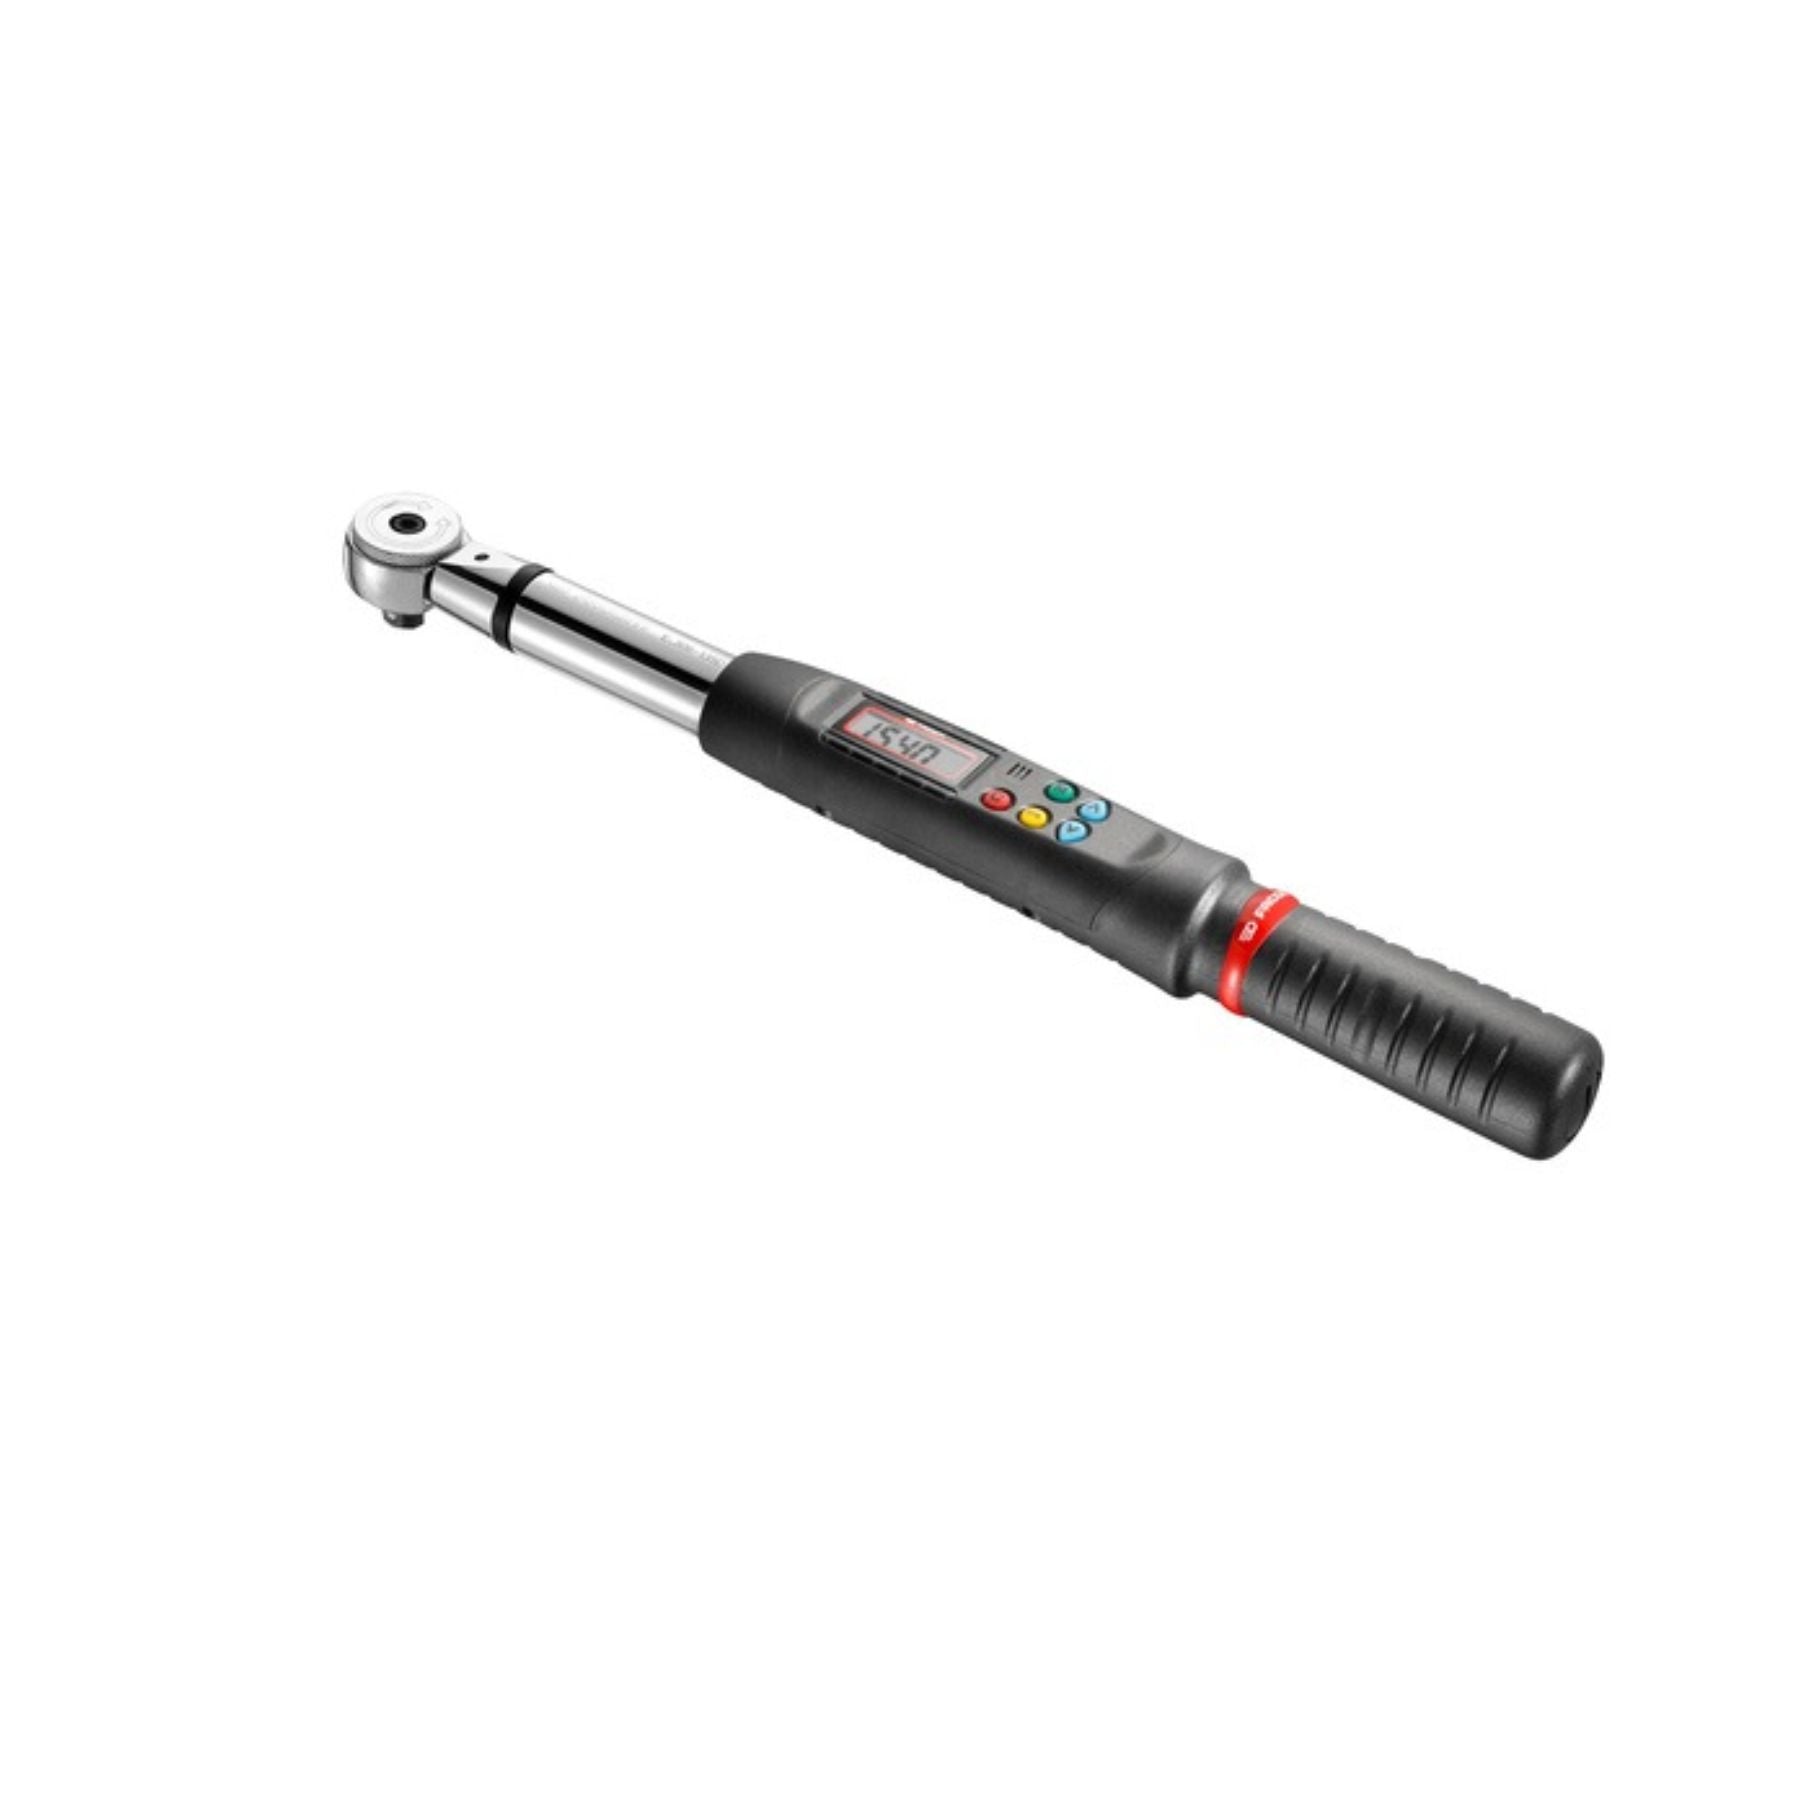 Facom E.306A135J Digital Electronic Torque Wrenches with Ratchet, Capacity 6.17-135, Square 3/8